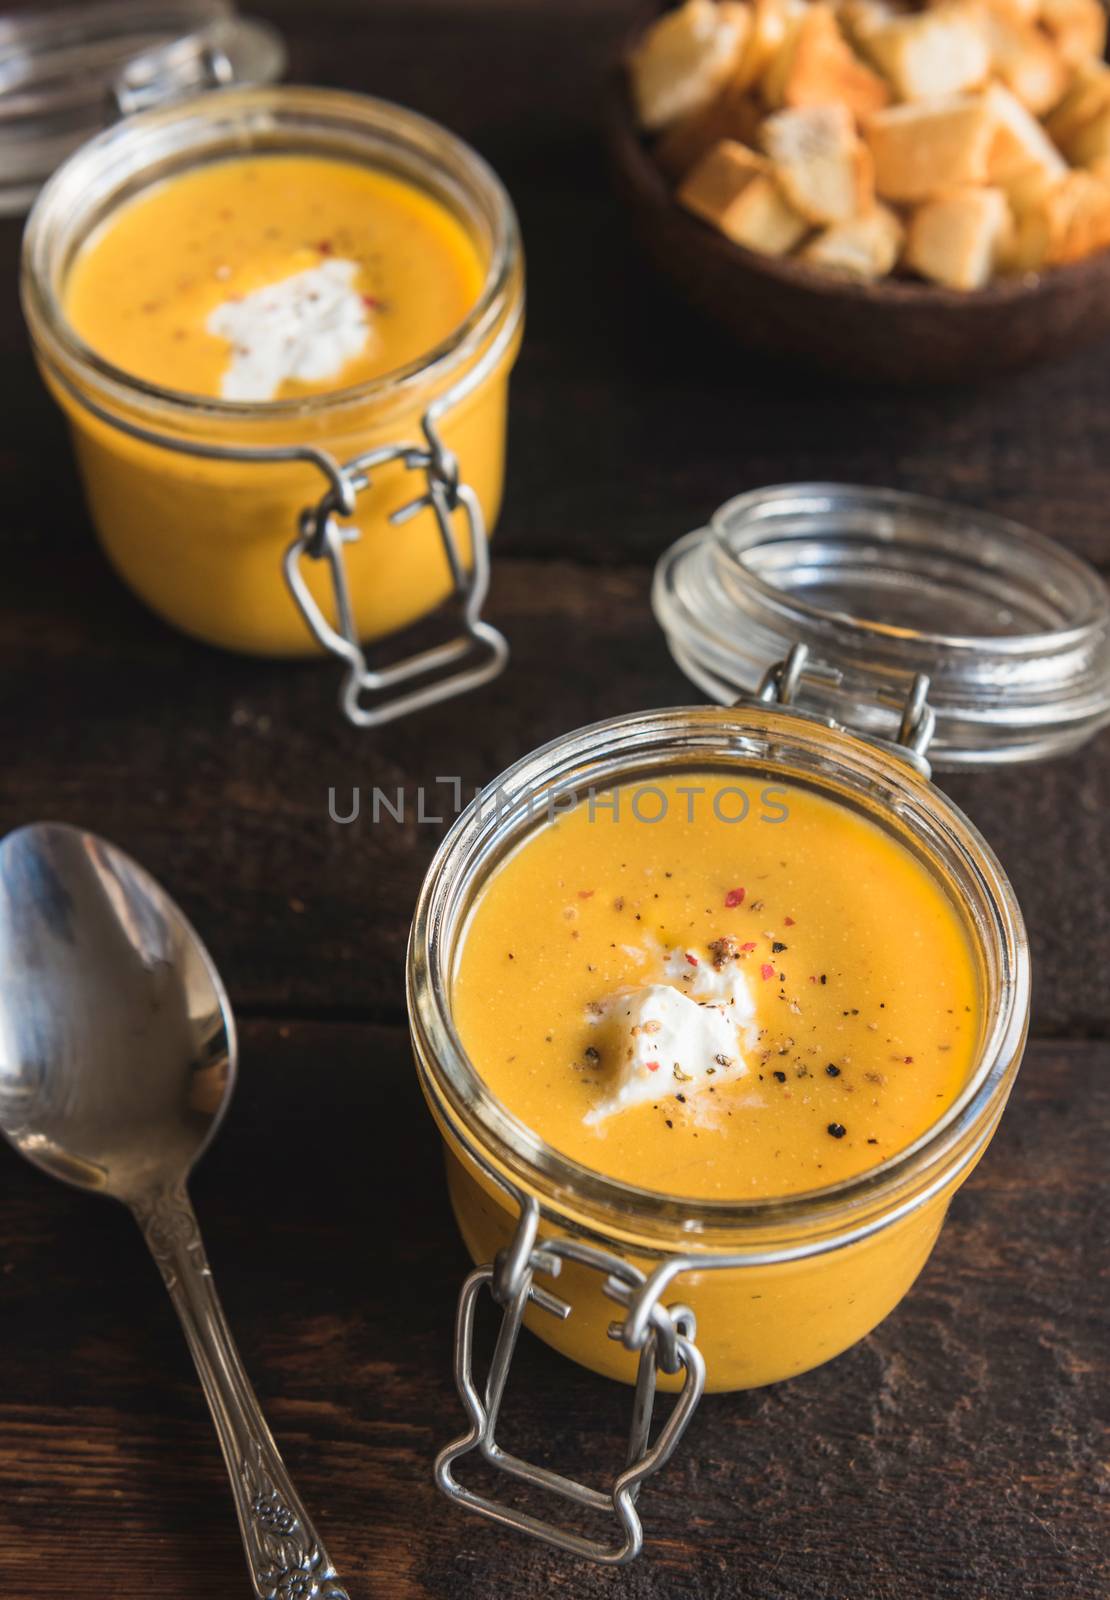 Pumpkin soup in the jars by badmanproduction